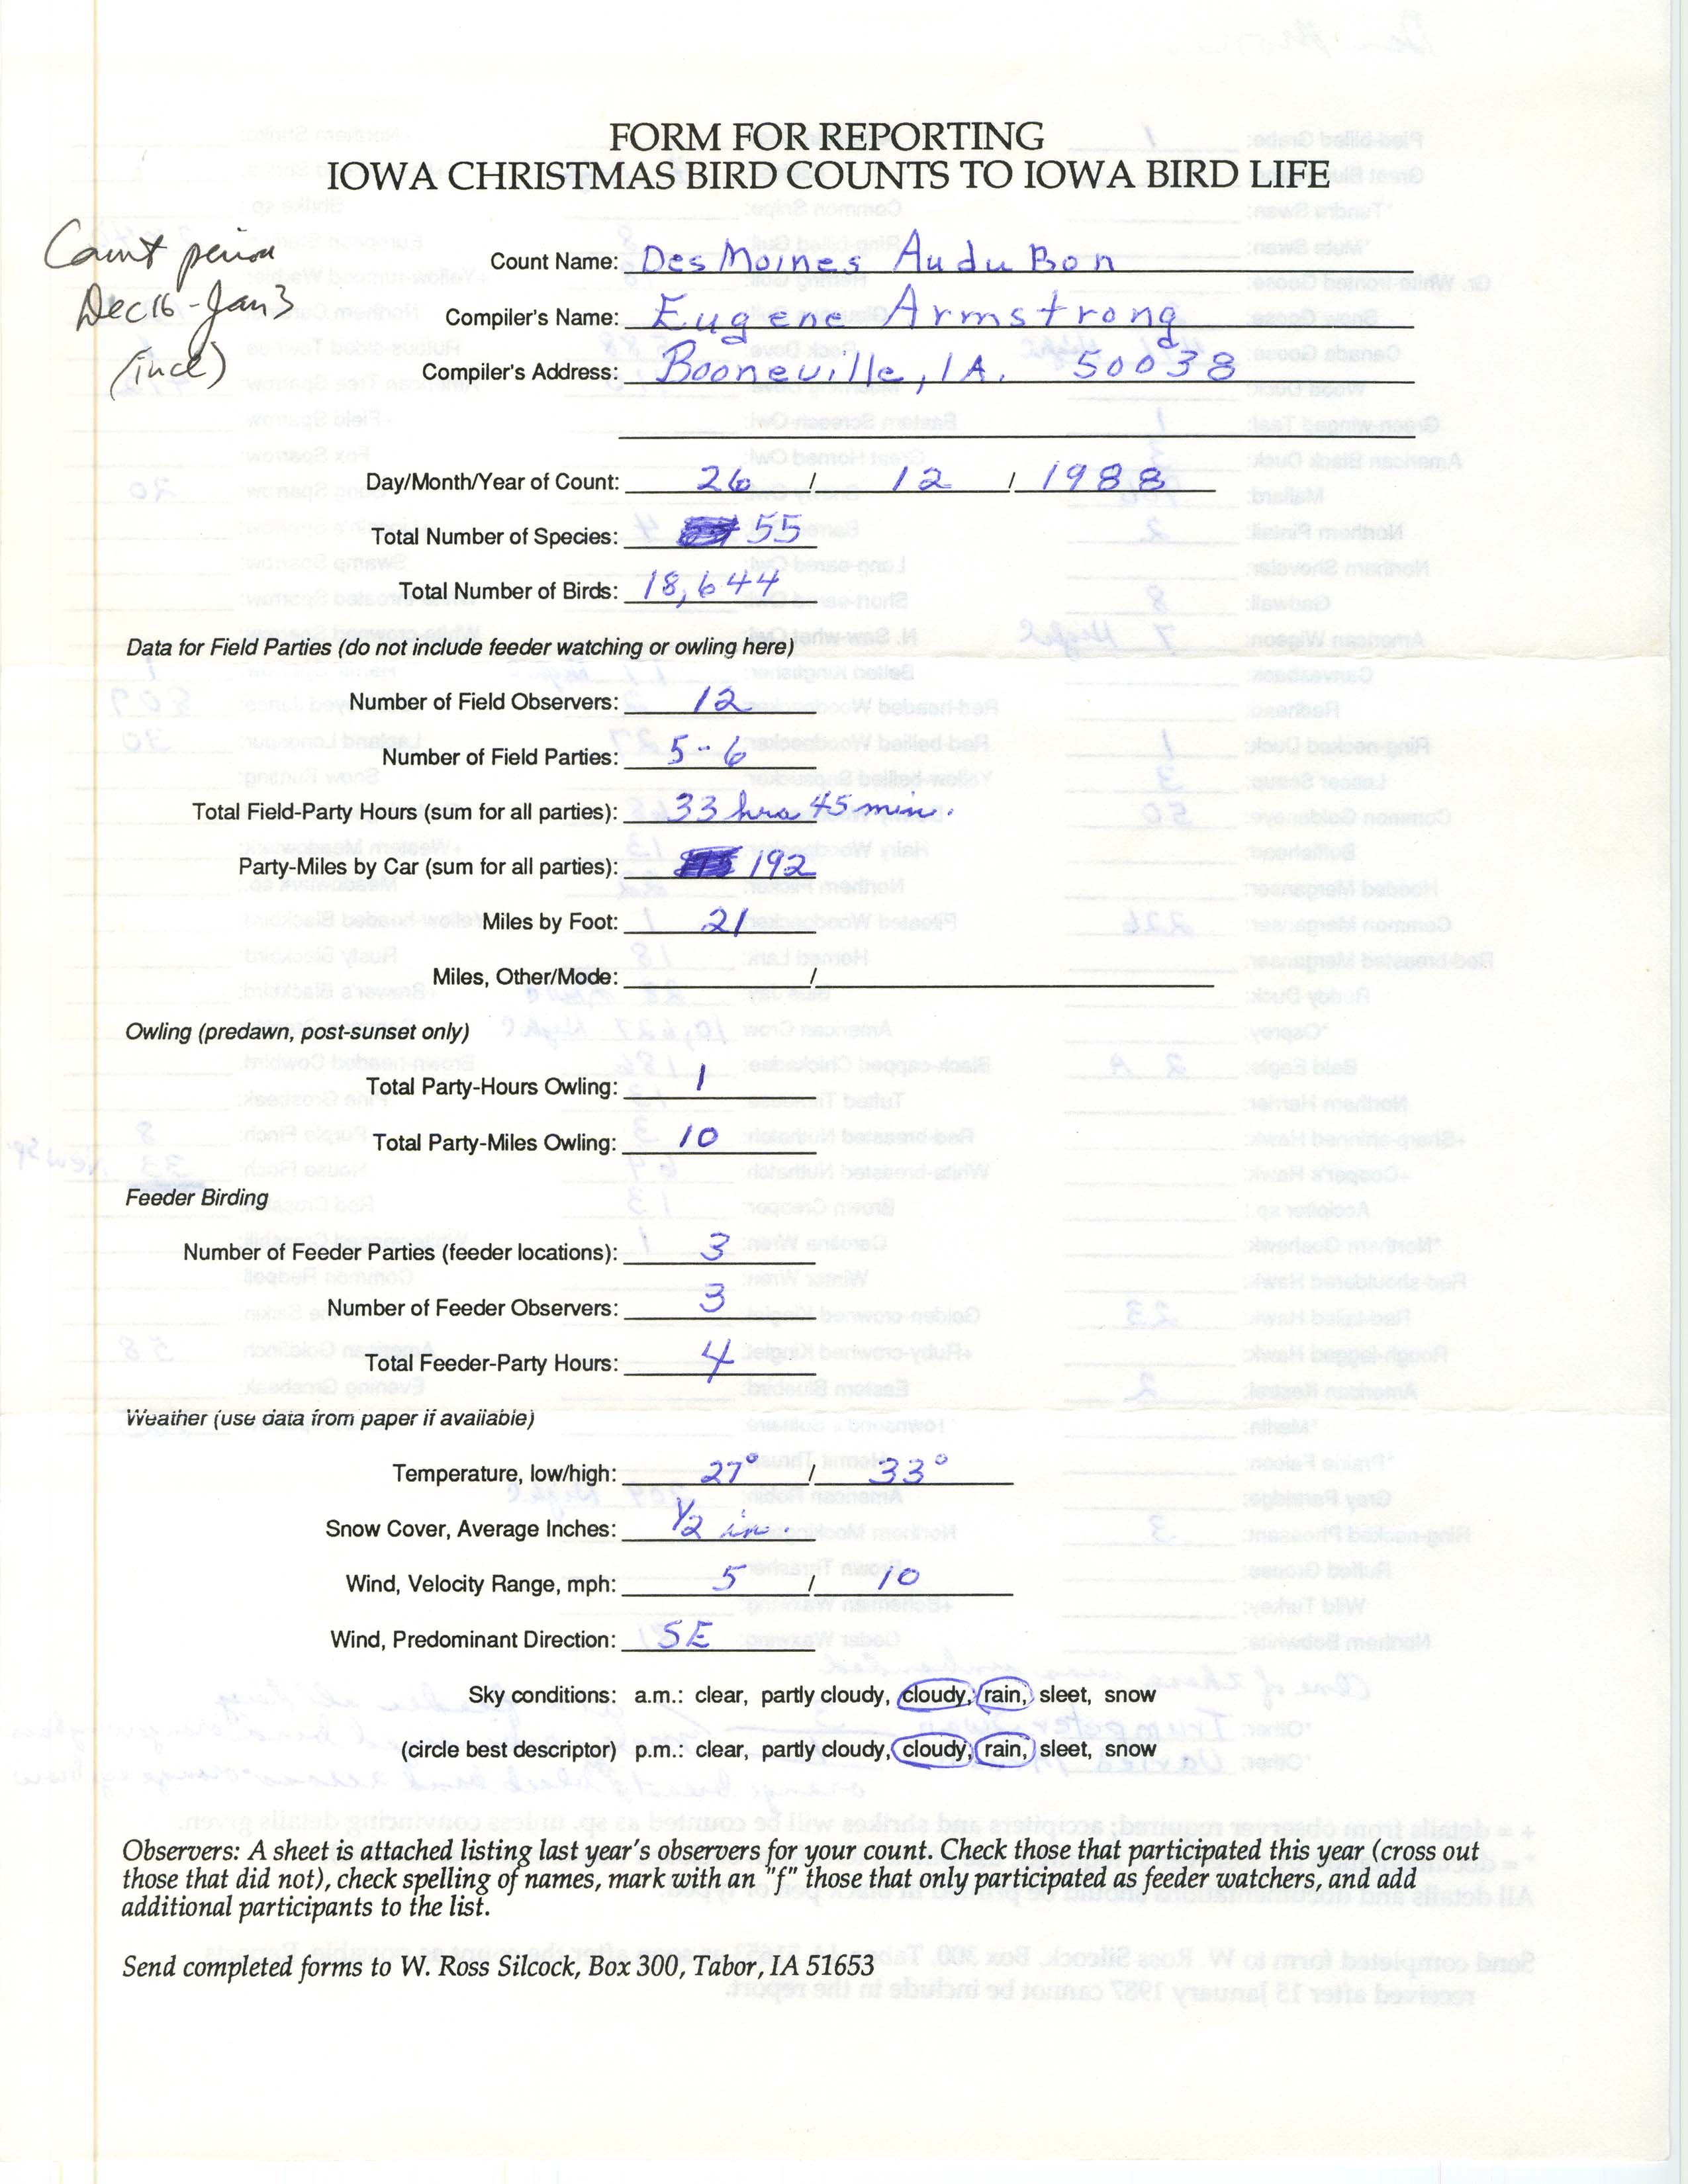 Form for reporting Iowa Christmas bird counts to Iowa Bird Life, Eugene Armstrong, December 26, 1988